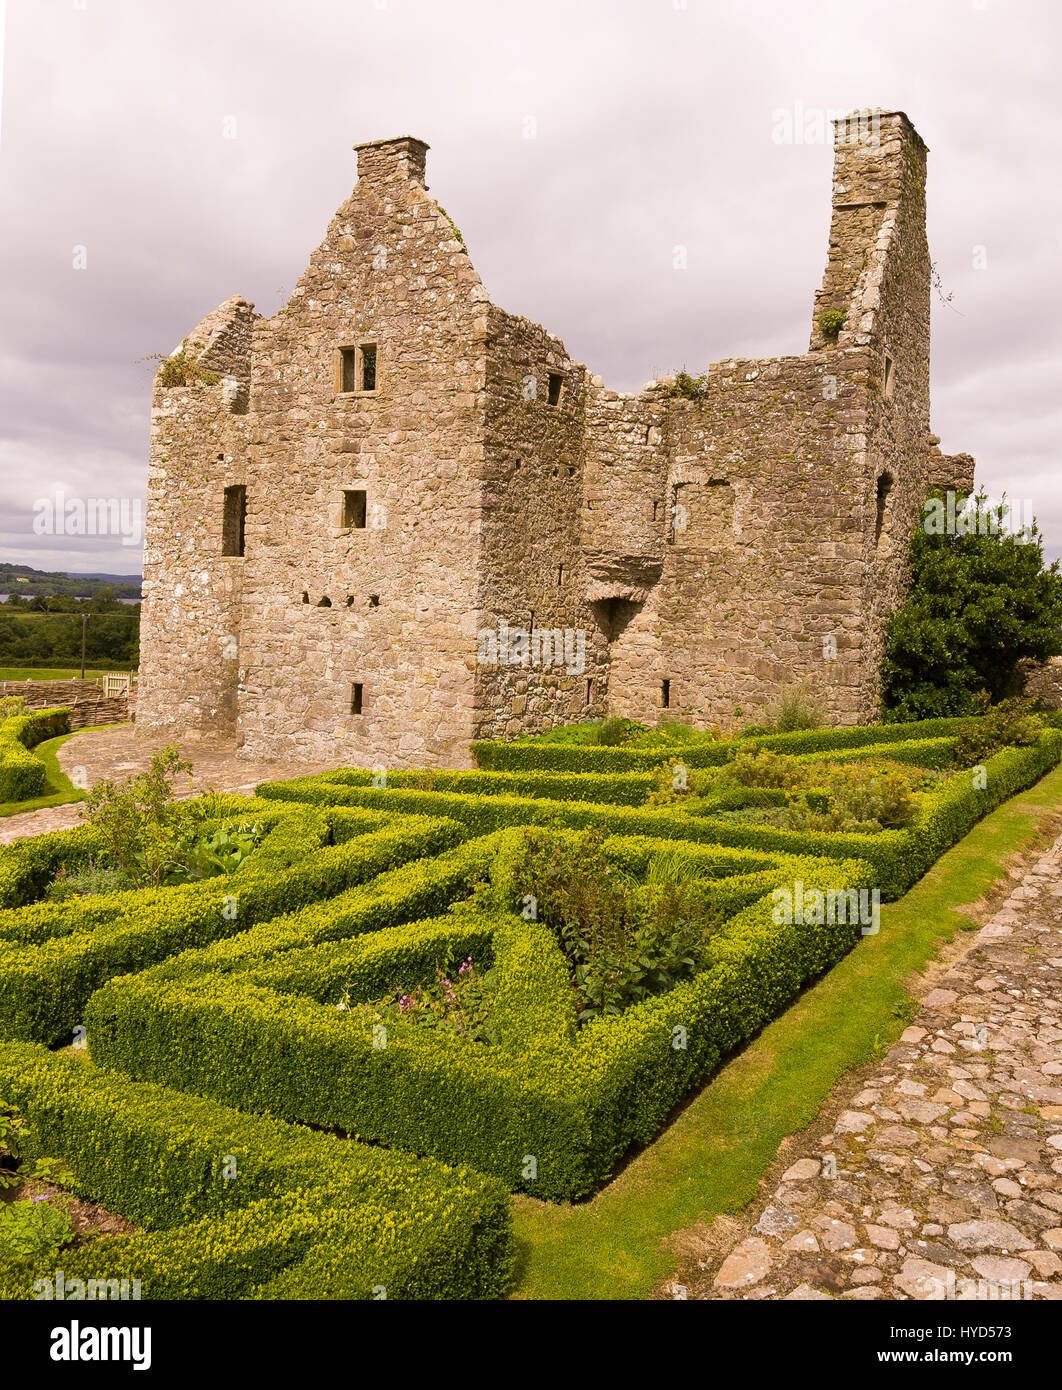 TULLY CASTLE, NORTHERN IRELAND - Gardens at ruins of Tully Castle, near Enniskillen, on Lower Lough Erne. Tully Castle, built early 1600s, in County Fermanagh, near the village of Blaney. Stock Photo